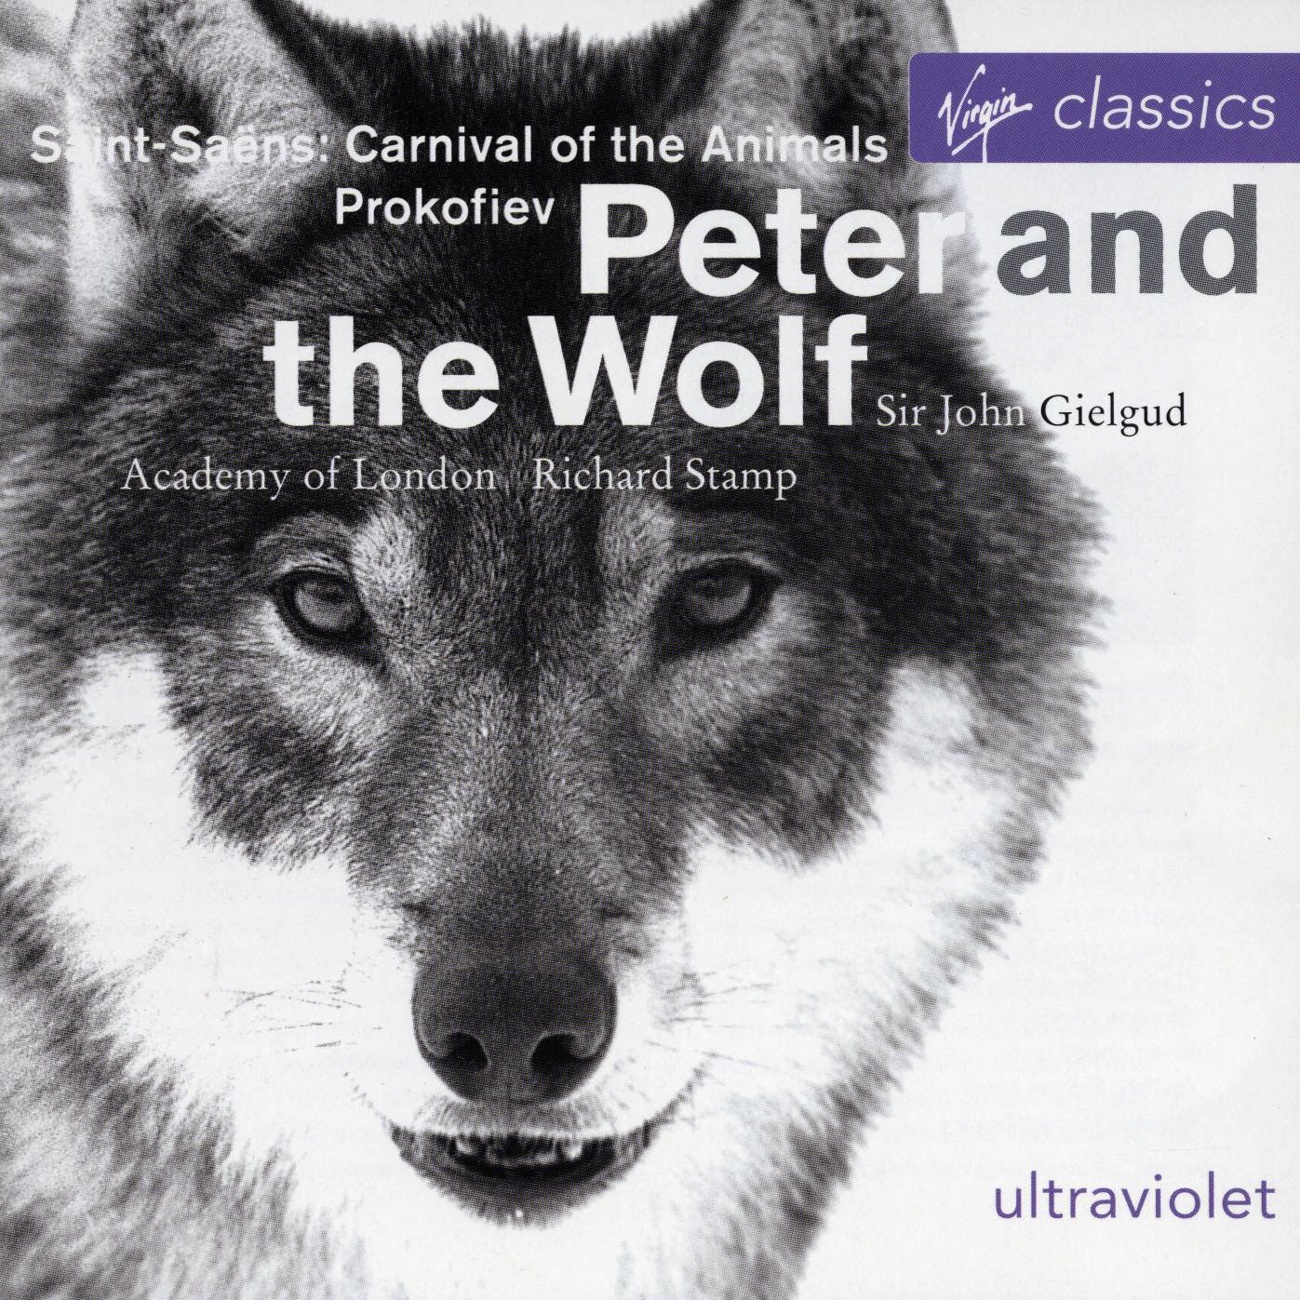 Peter and the Wolf Op. 67